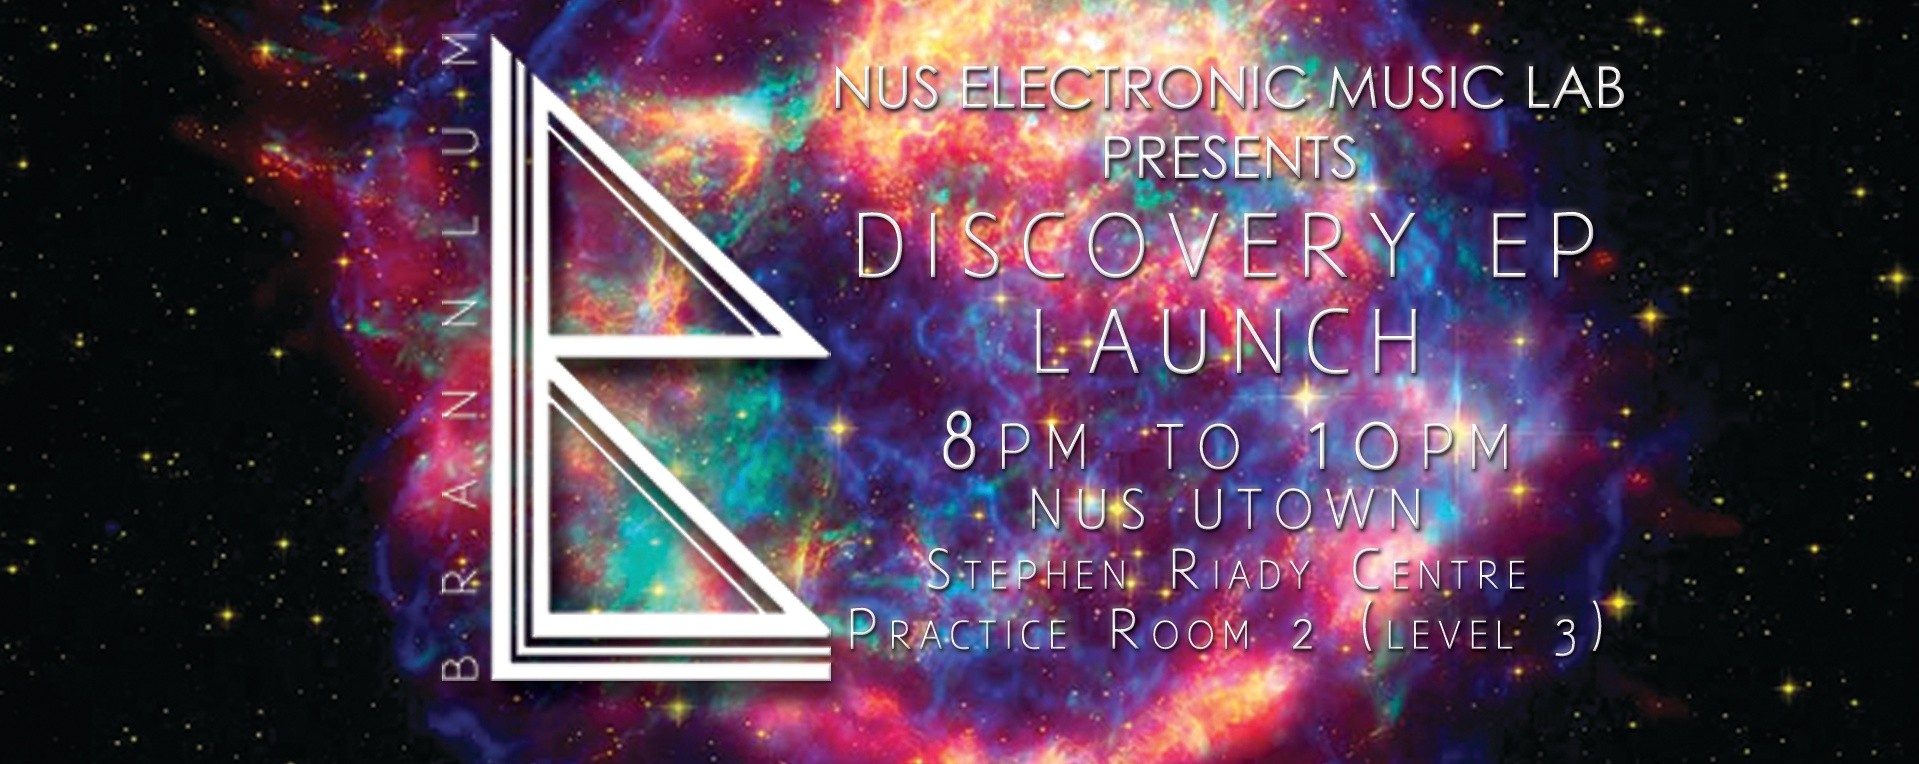 BRANNLUM DISCOVERY EP LAUNCH